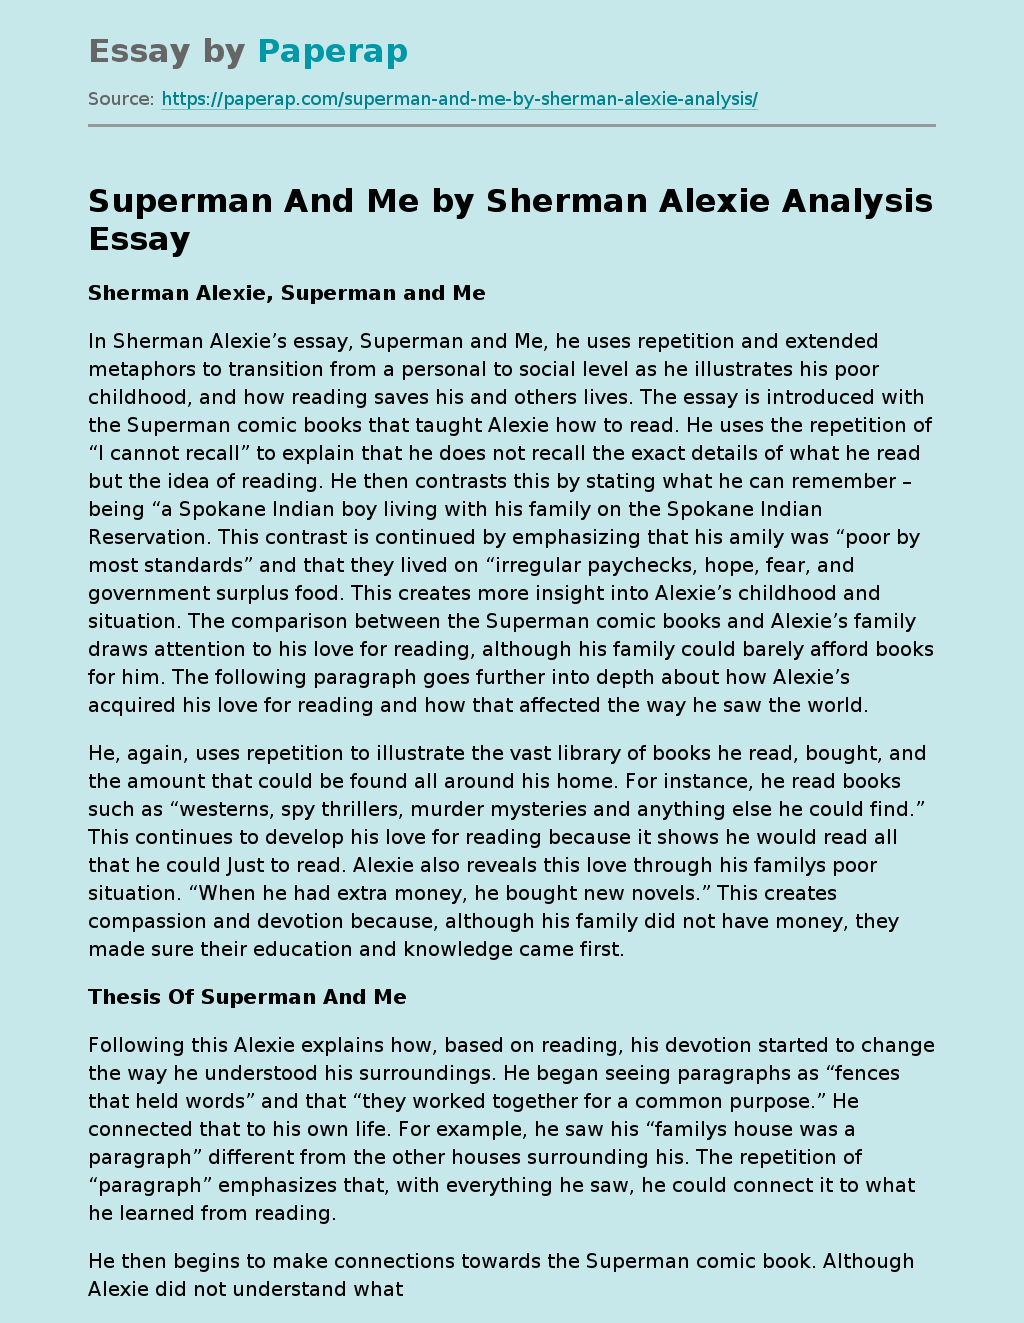 Superman And Me by Sherman Alexie Analysis